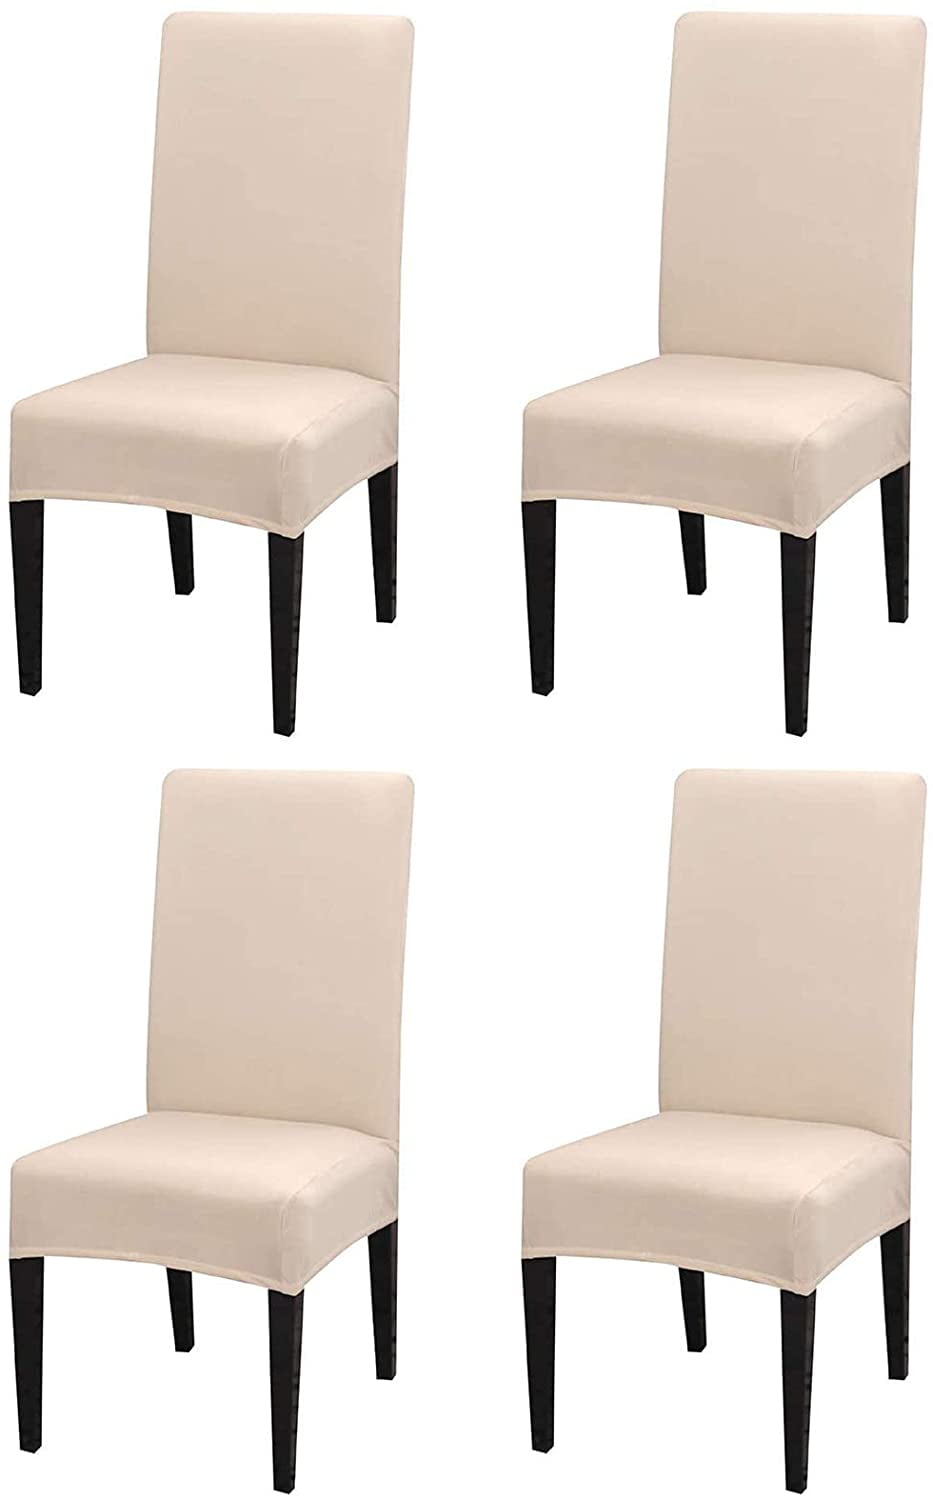 Details about   HOT 1PC Velvet Chair Cover Solid Polyester Seat Cover Stretch Home/Wedding SOFT 